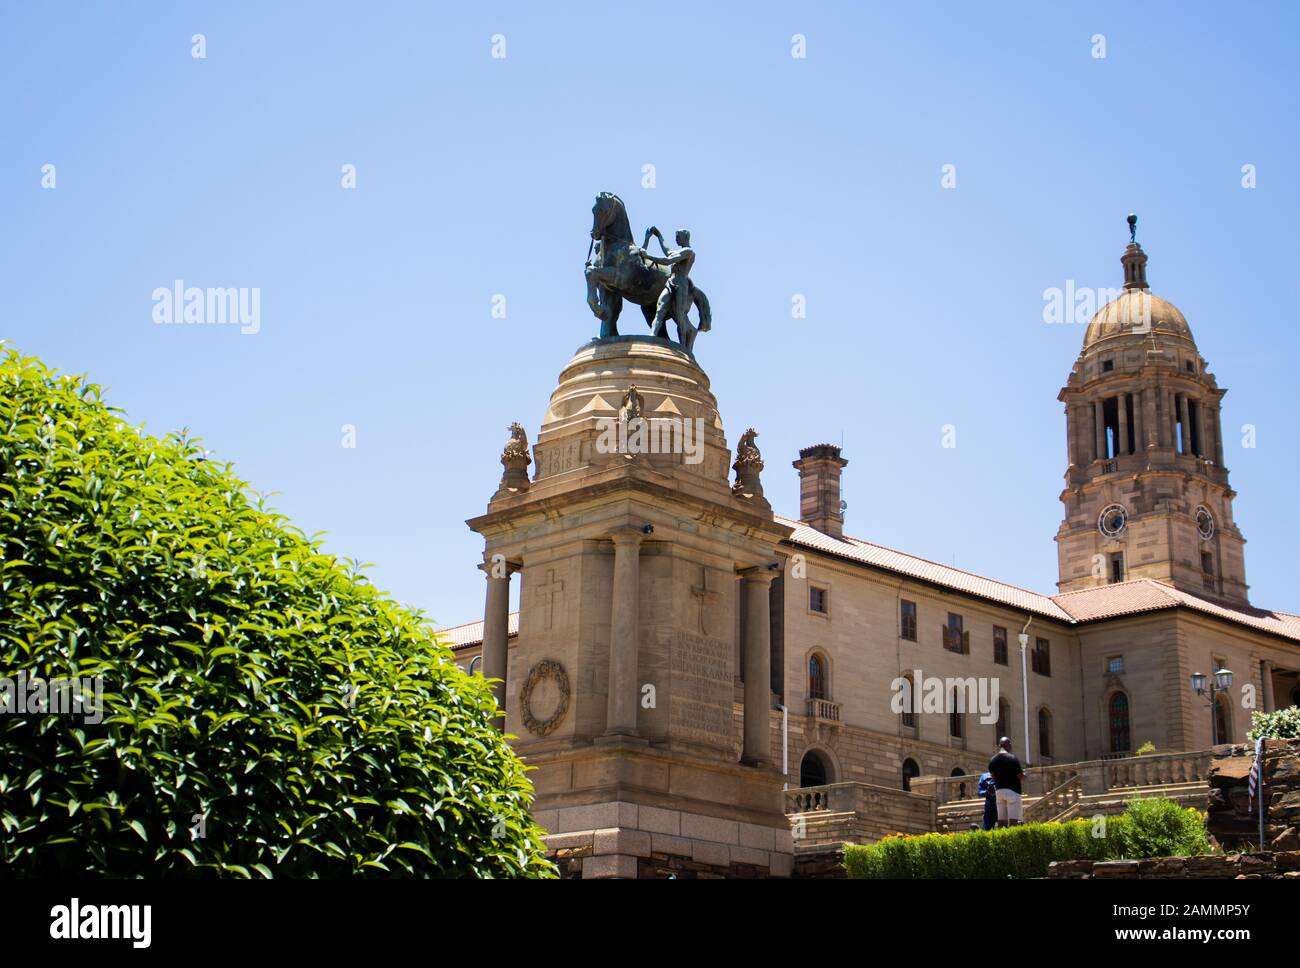 The Union Buildings in Pretoria, South Africa. Stock Photo